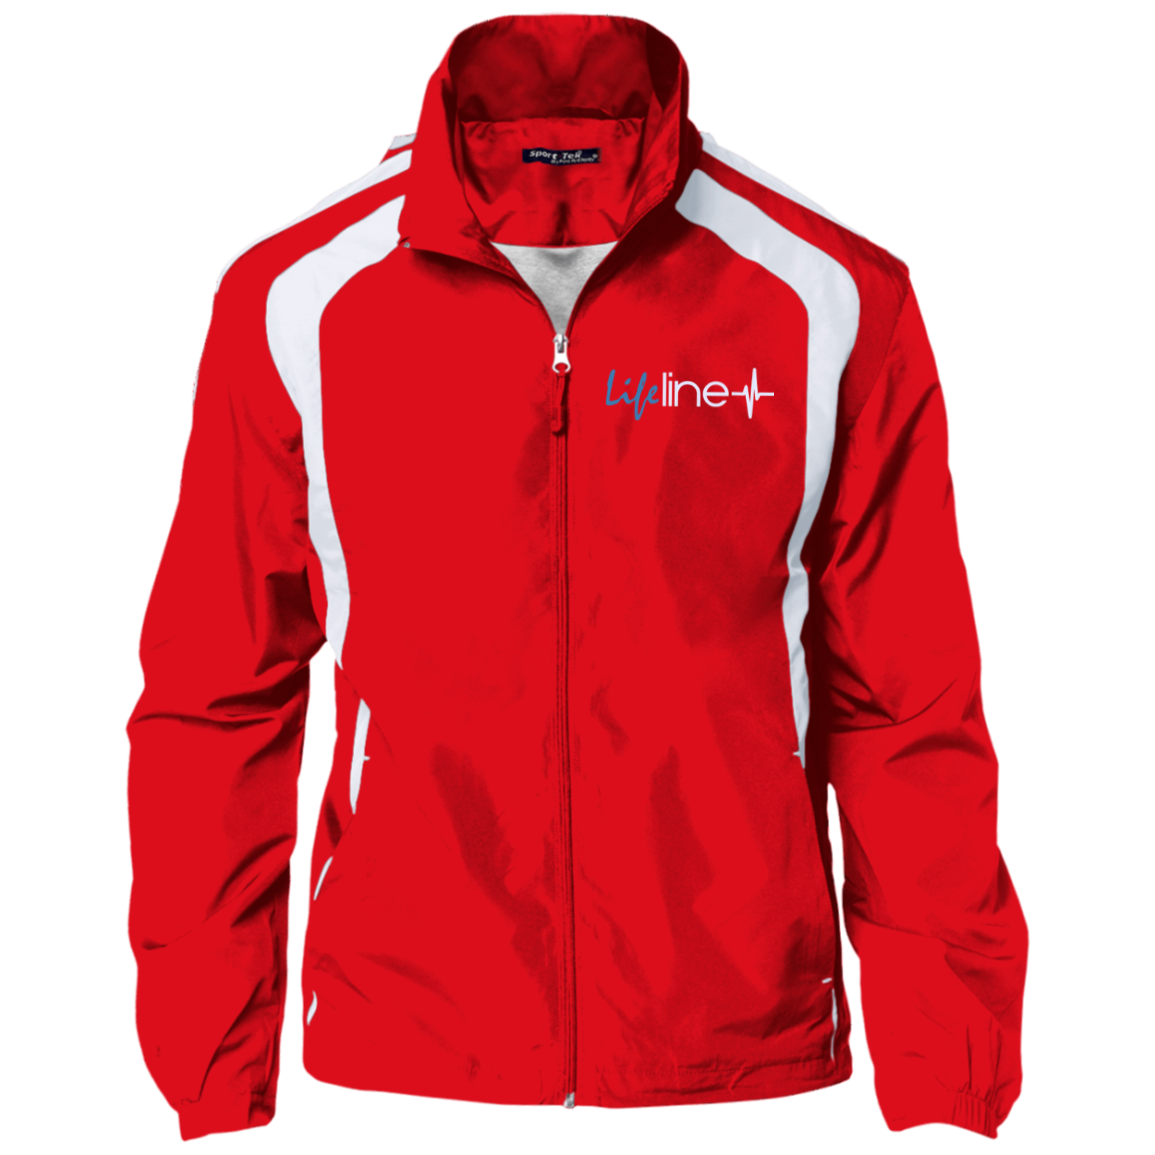 LIFE Line Personalized Jersey-Lined Jacket